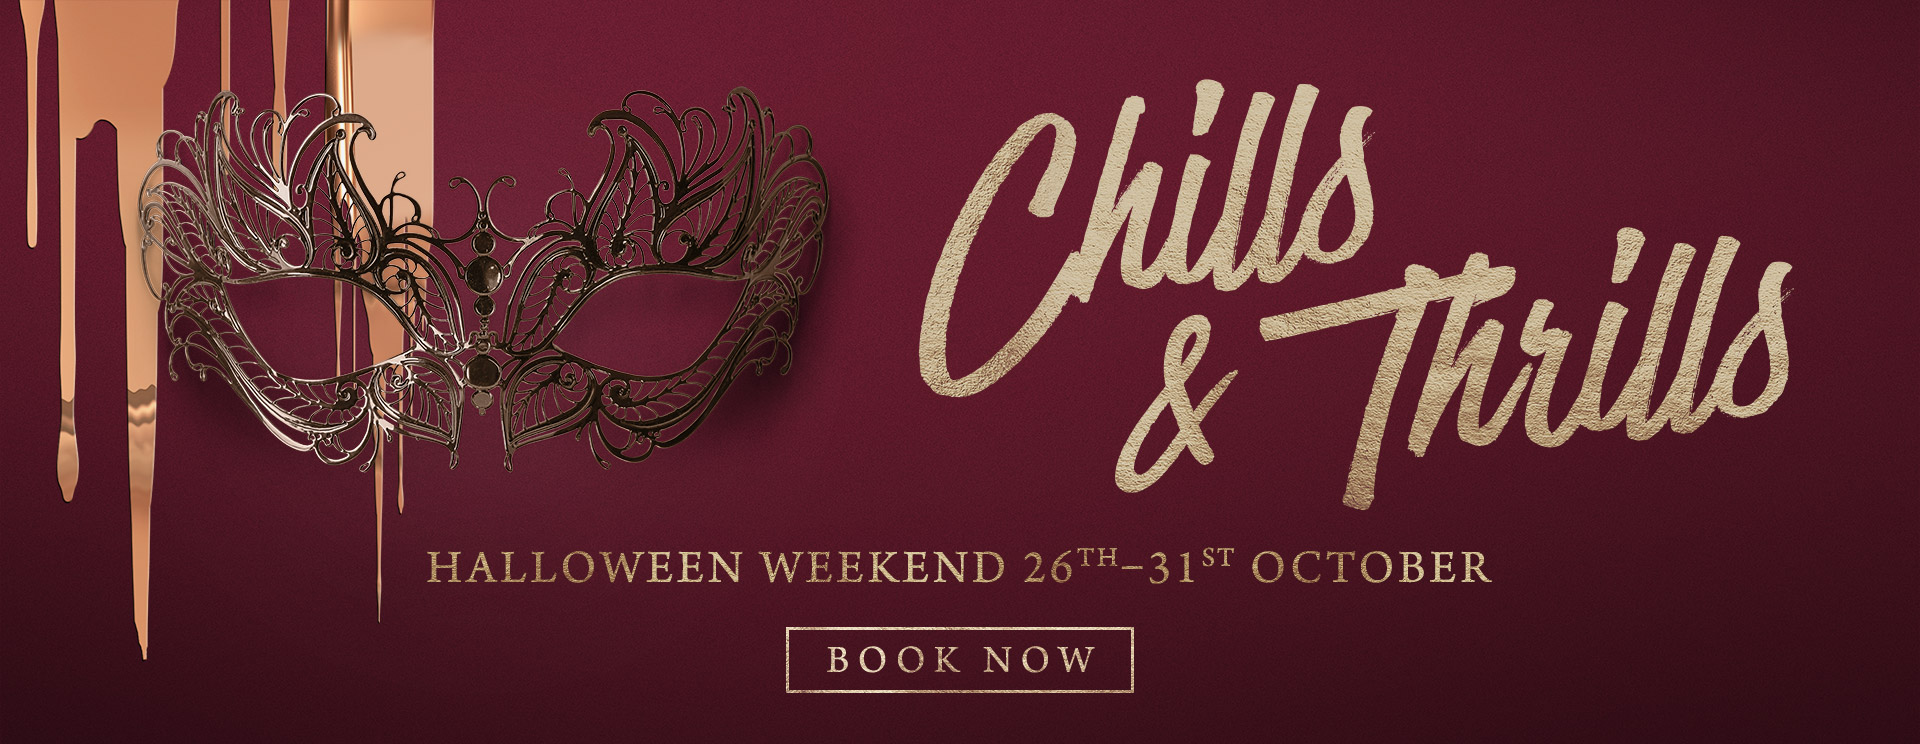 Chills & Thrills this Halloween at The Trout Inn